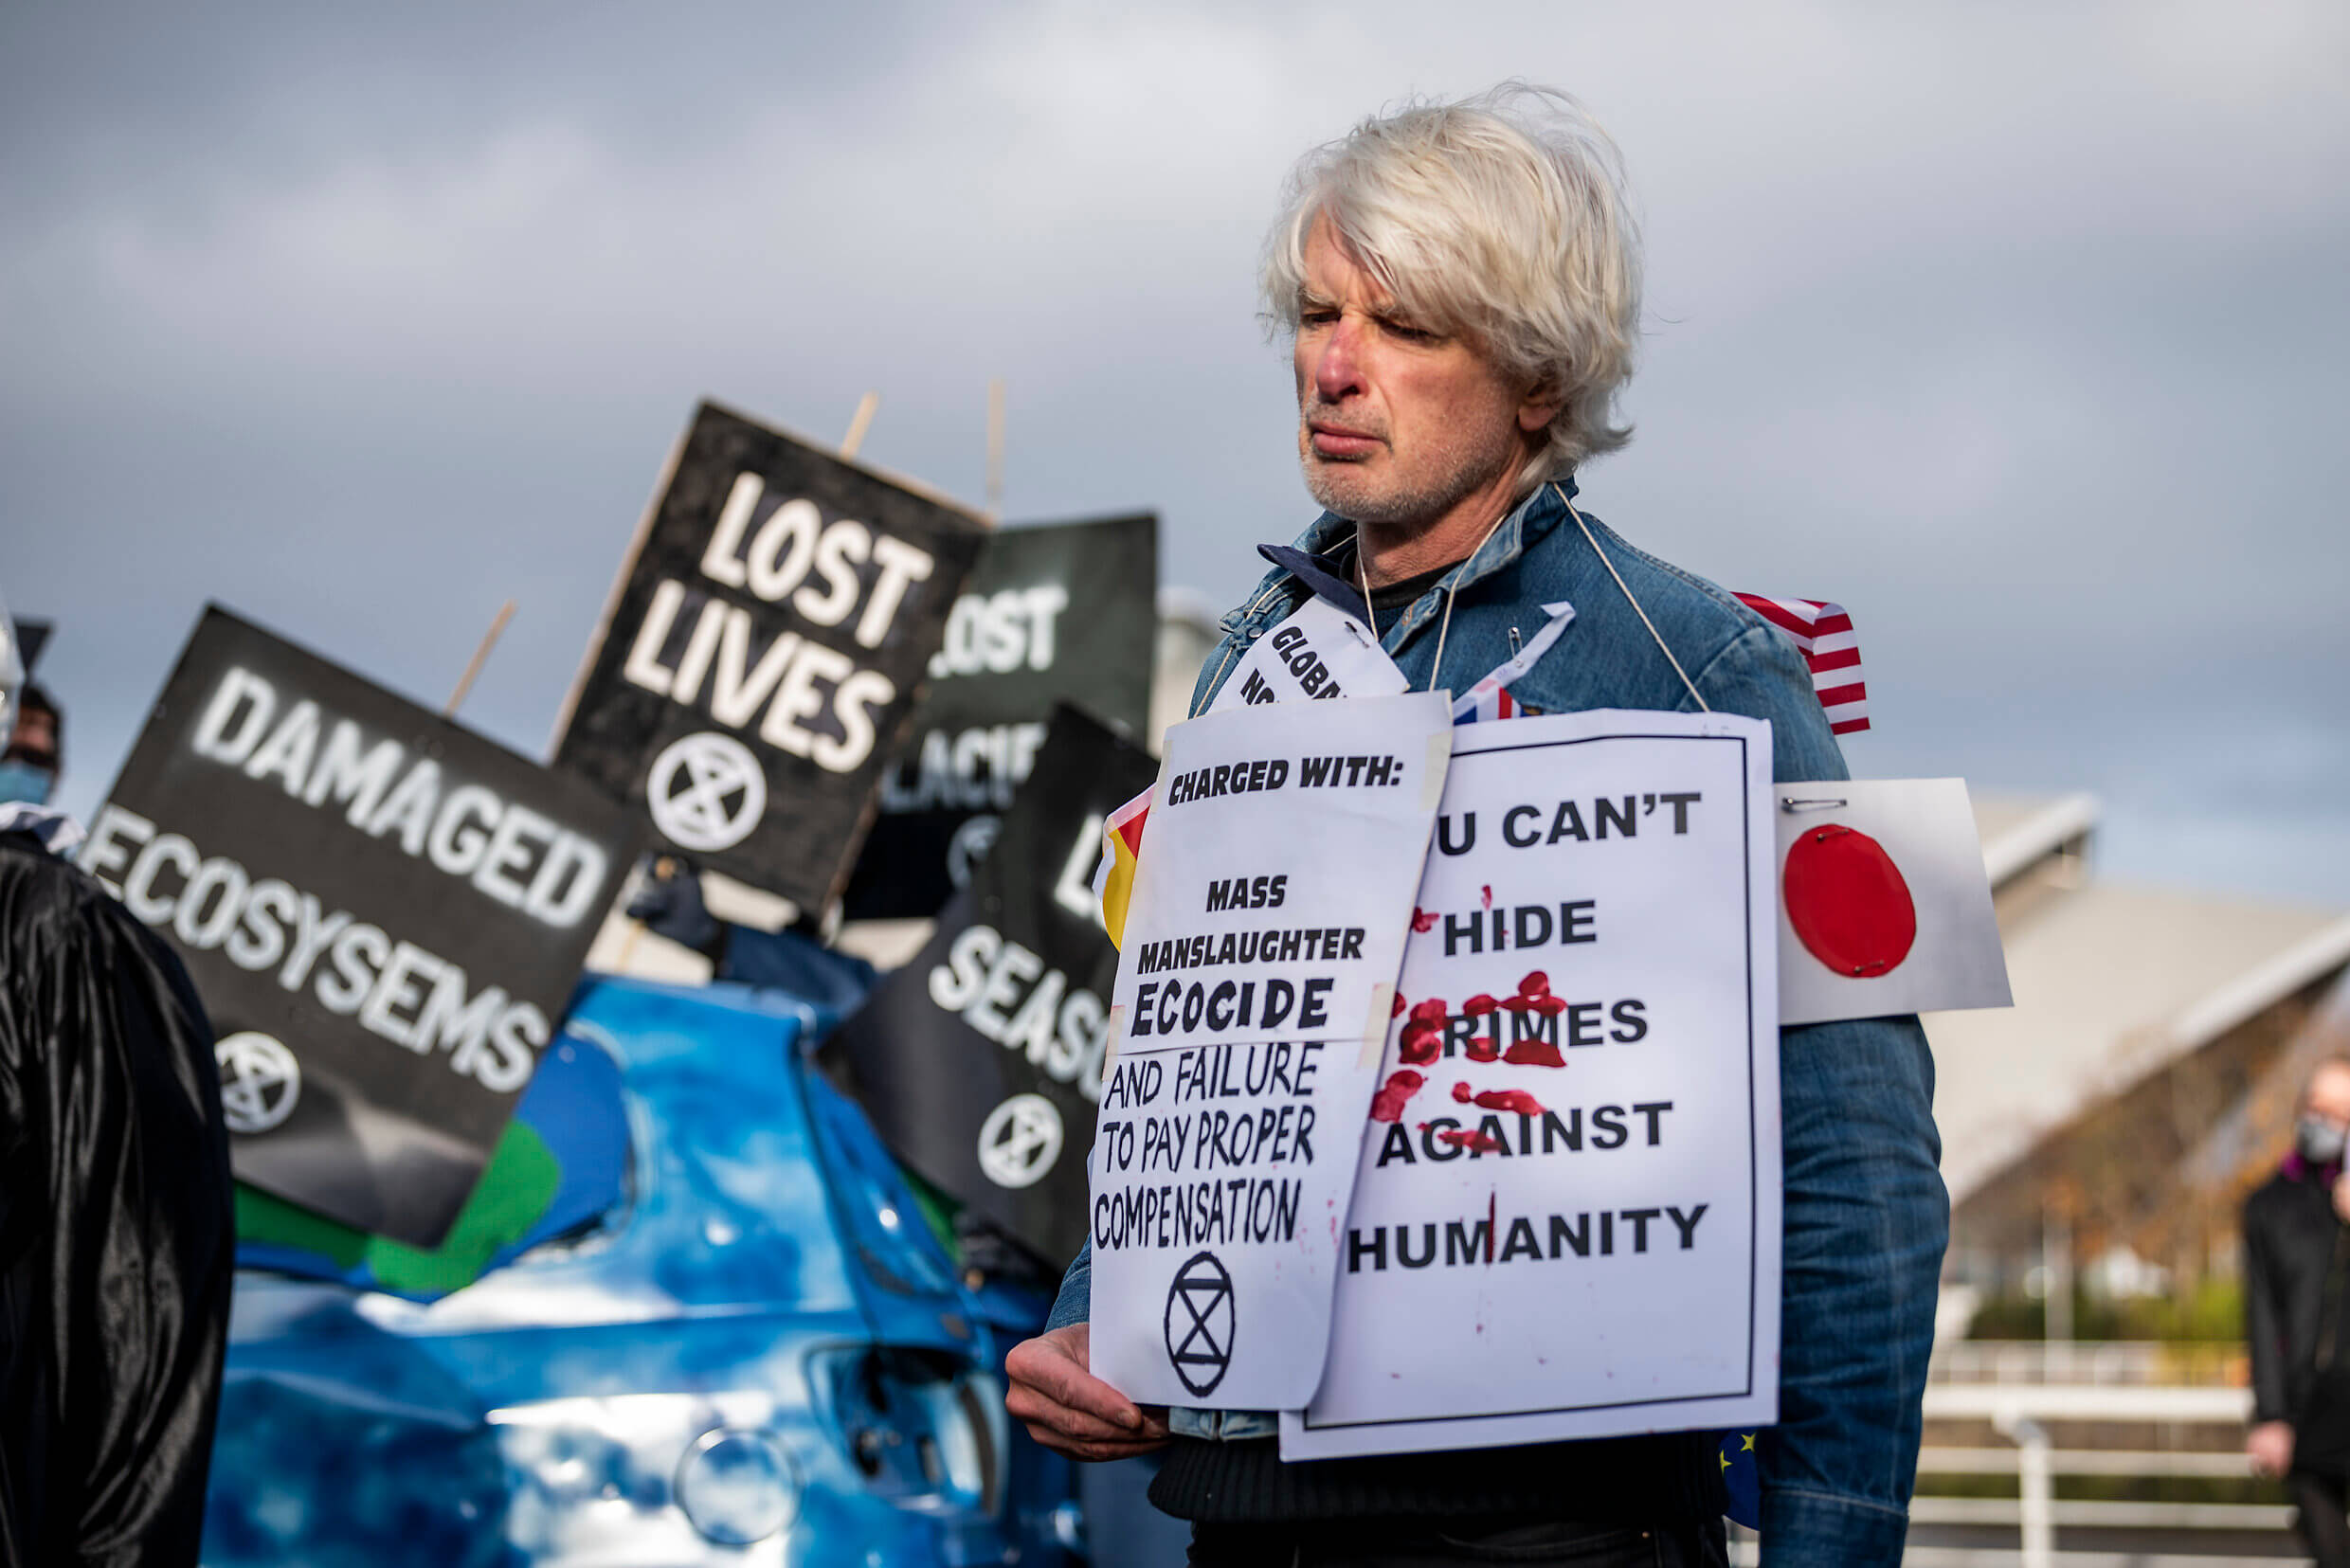 Image shows an XR activist wearing signs saying "Charged with Mass Slaughter, Ecocide and Failure to Pay Proper Compensation"